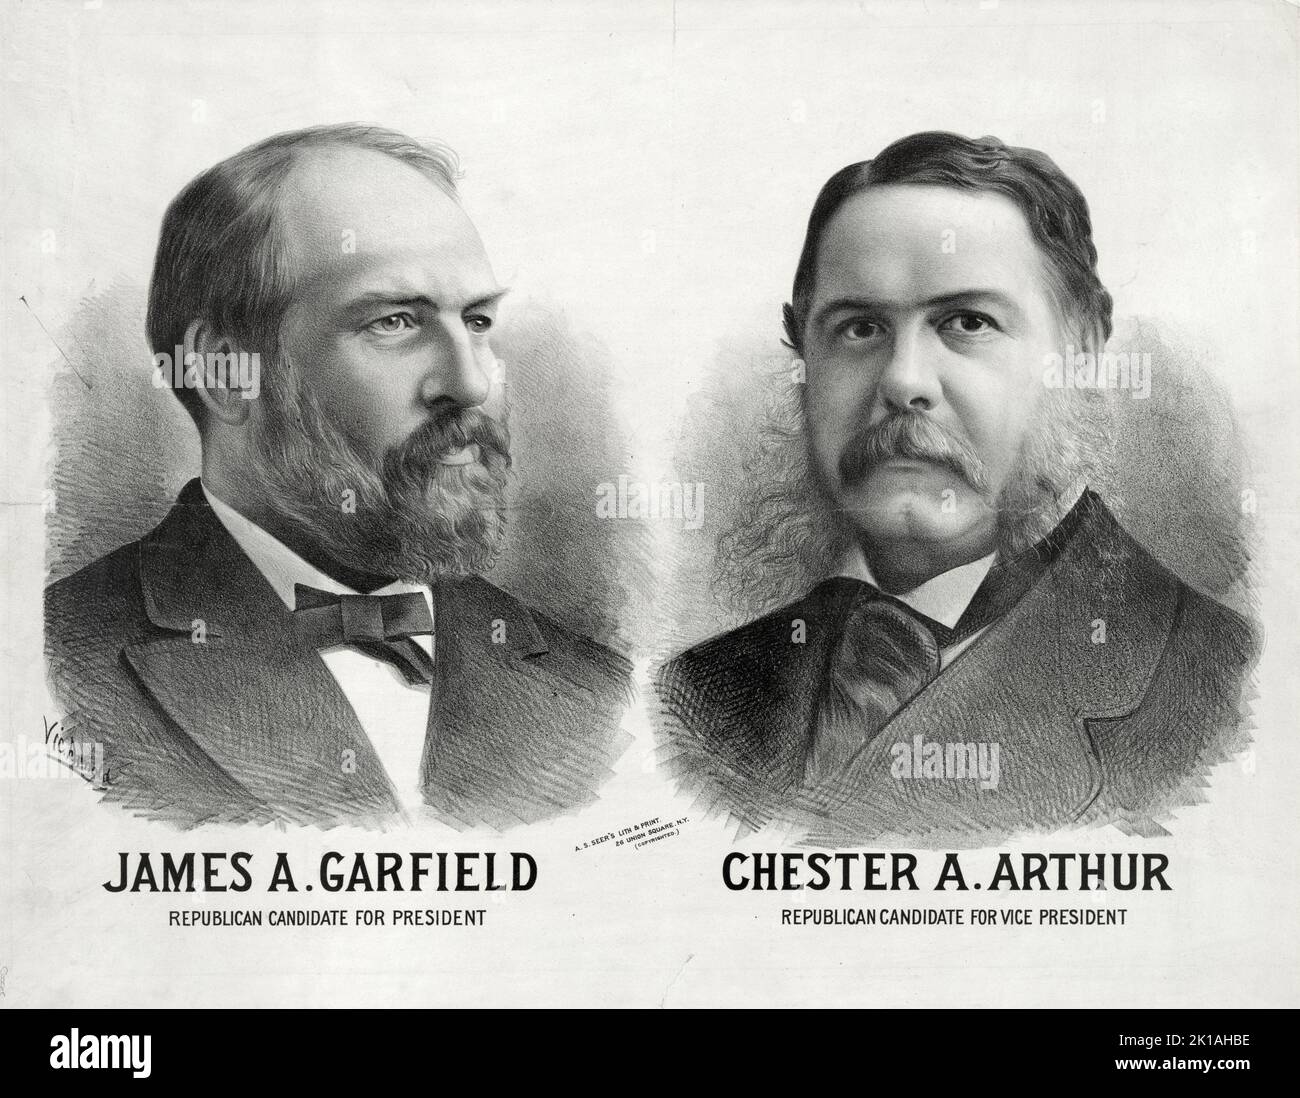 A vintage Republican alection campaign poster showing James Garfield as the presidential candidate and Chester Arthur as his vice-president. Stock Photo